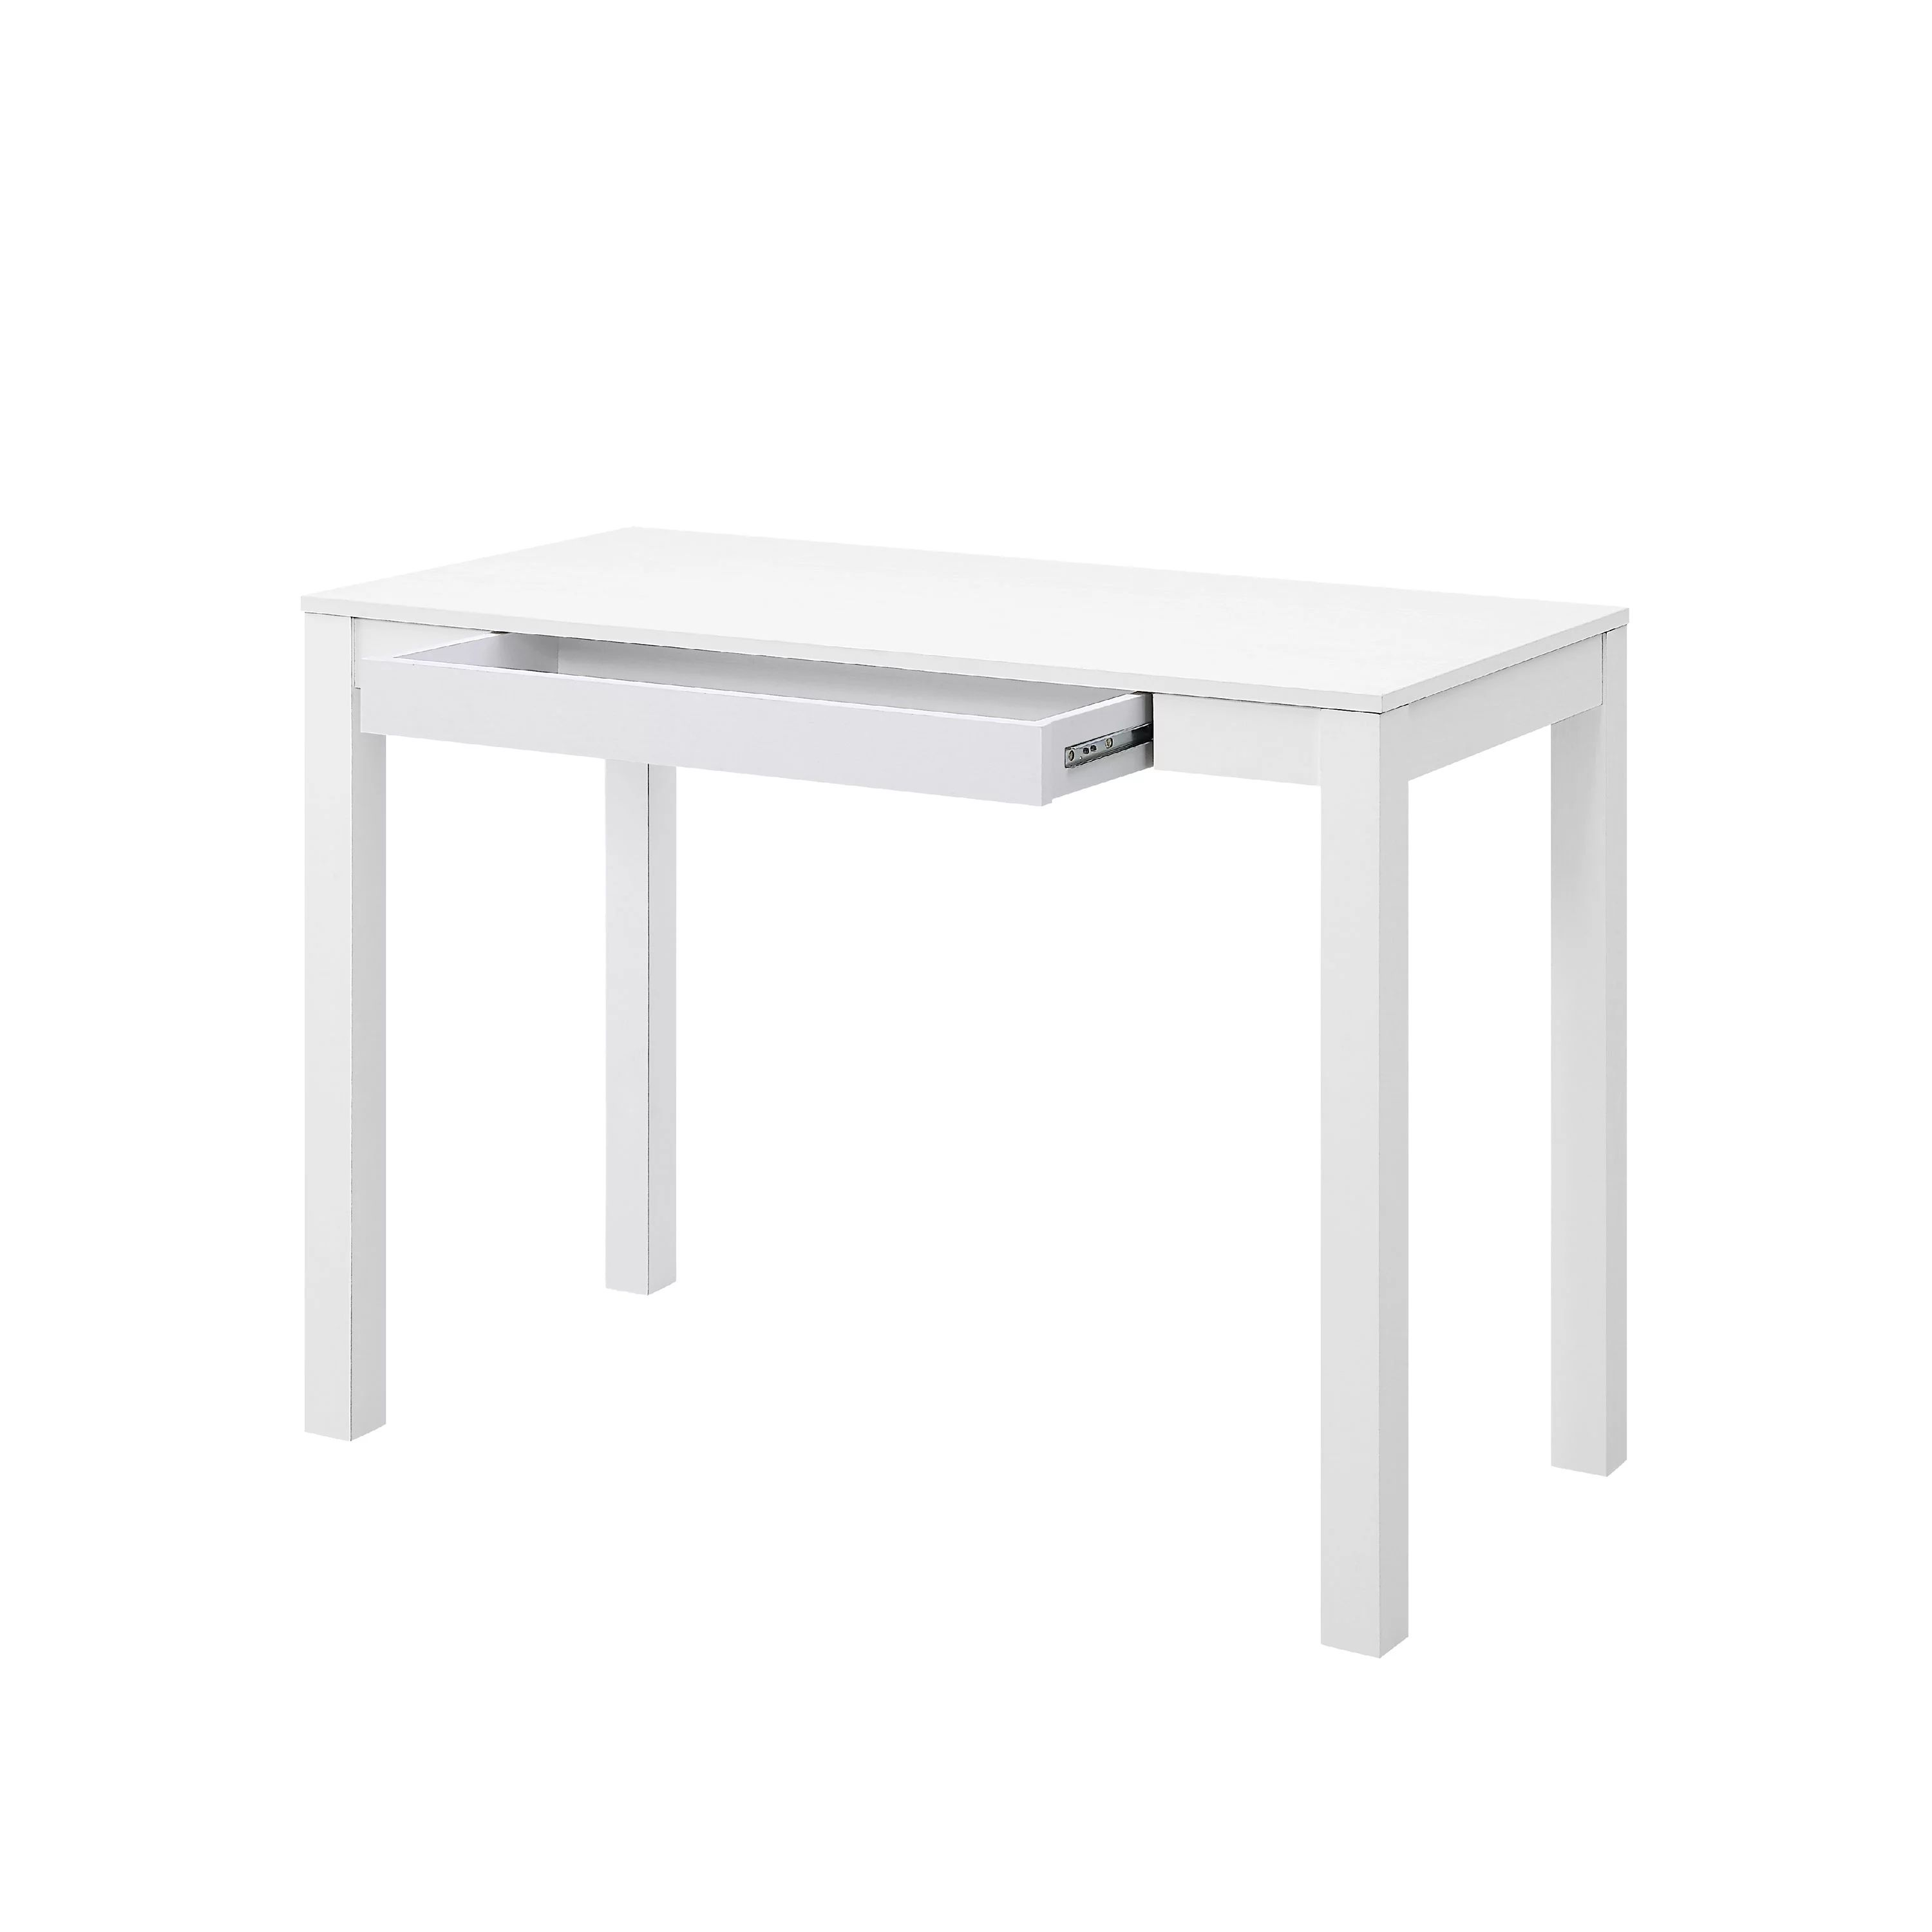 Mainstays Parsons Writing Desk with Storage Drawer, Multiple Finishes | Walmart (US)